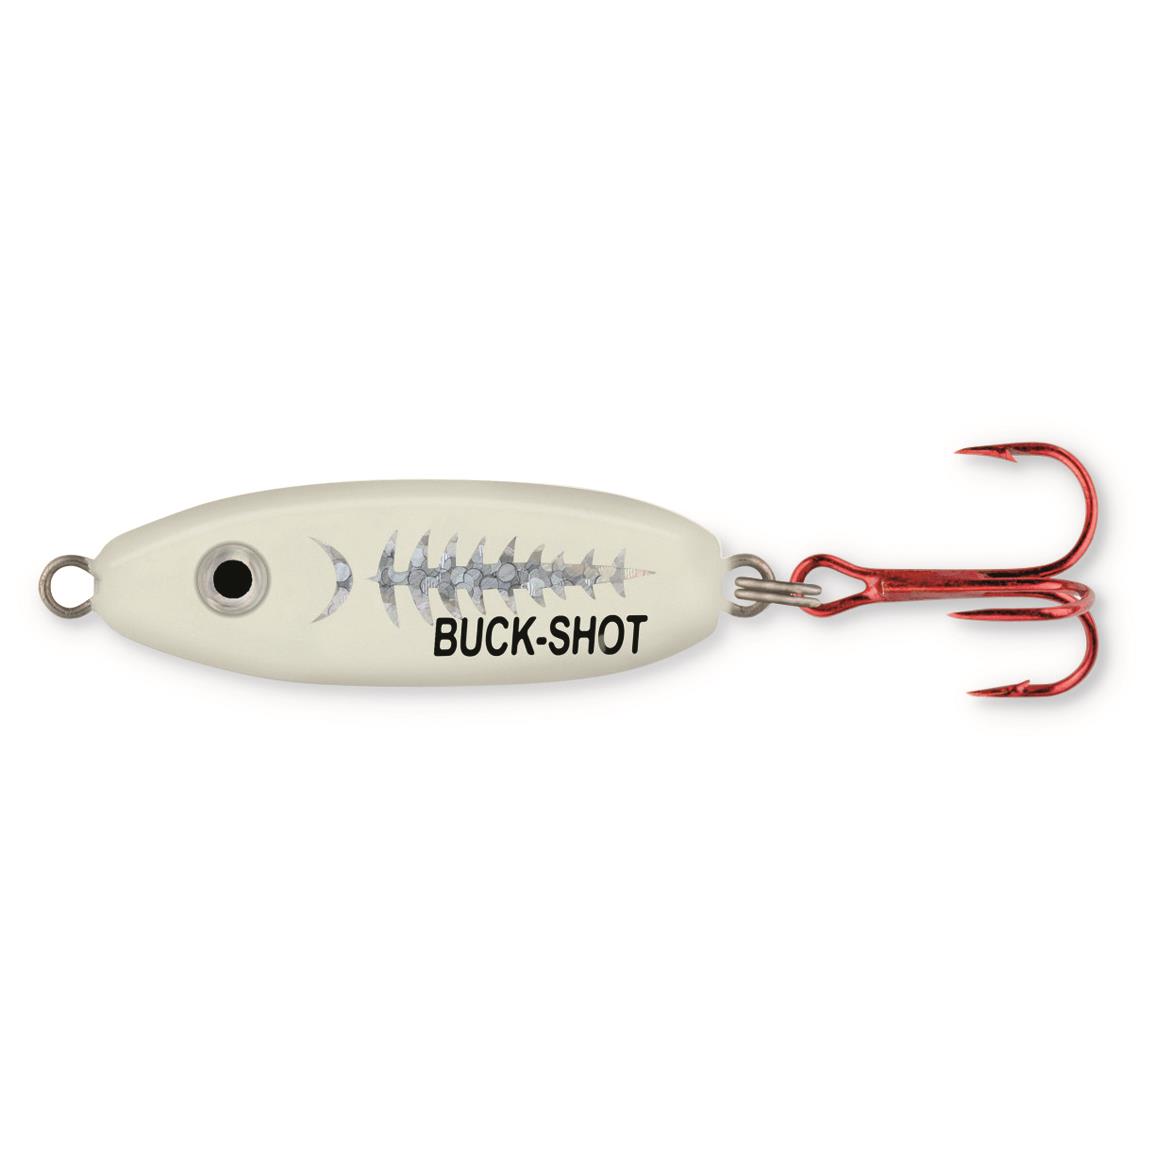 Clam Leech Flutter Spoon Kit - 712186, Ice Tackle at Sportsman's Guide